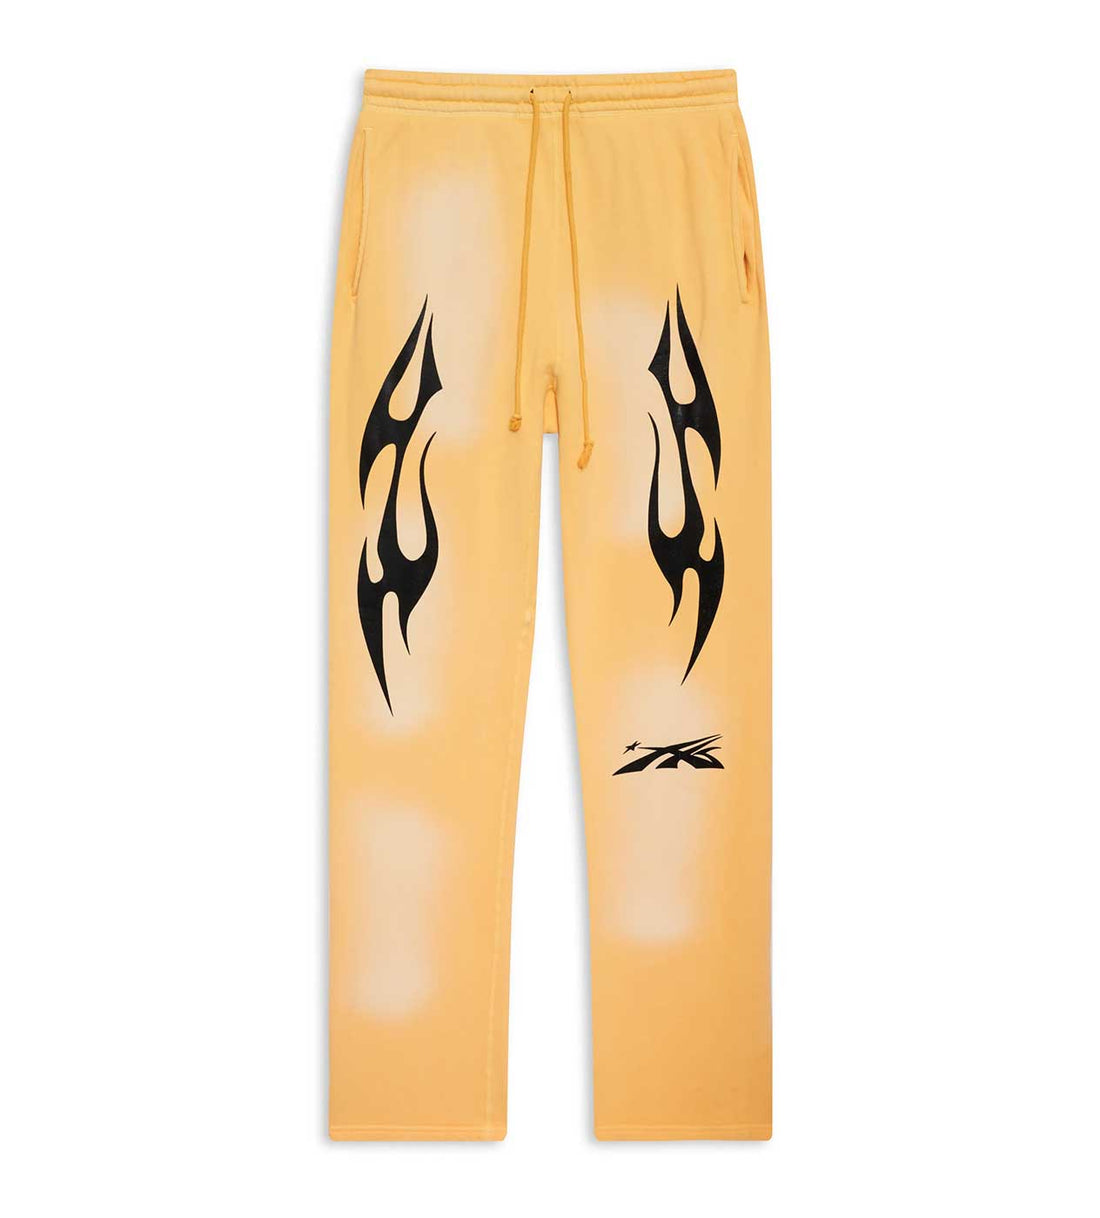 Hellstar Sports Sweatpants Yellow Front View